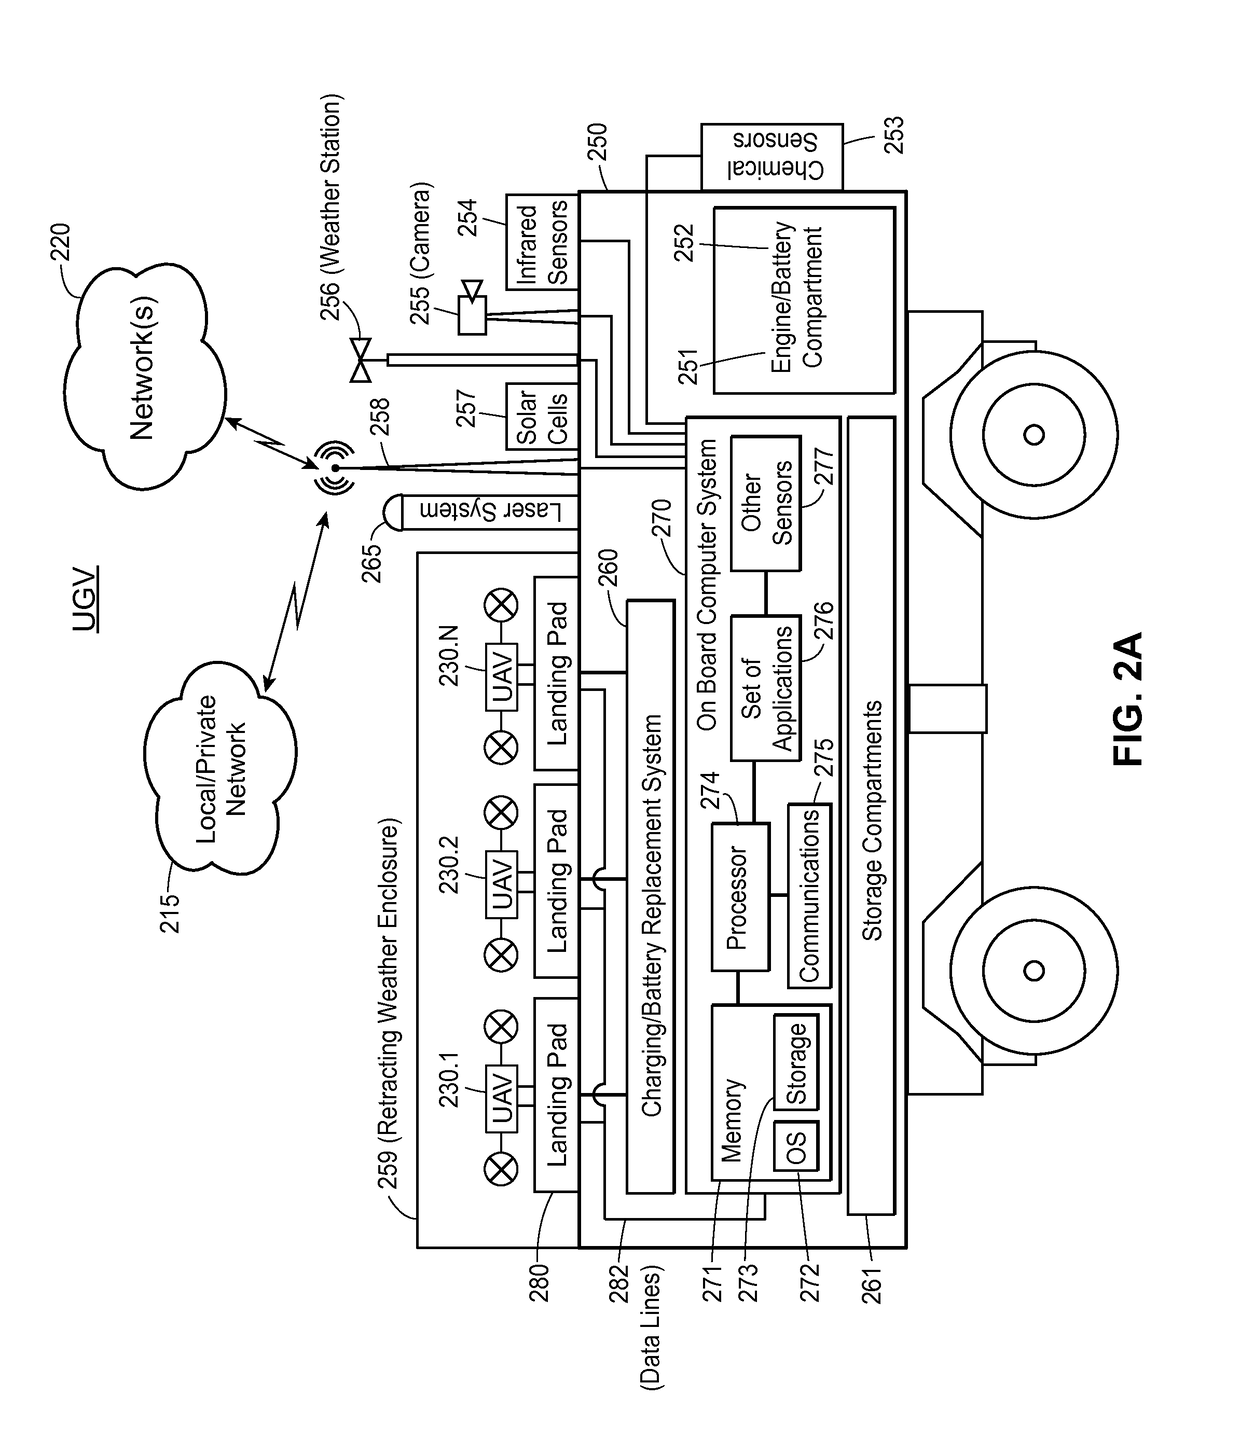 Systems and methods for remote data collection using unmanned vehicles